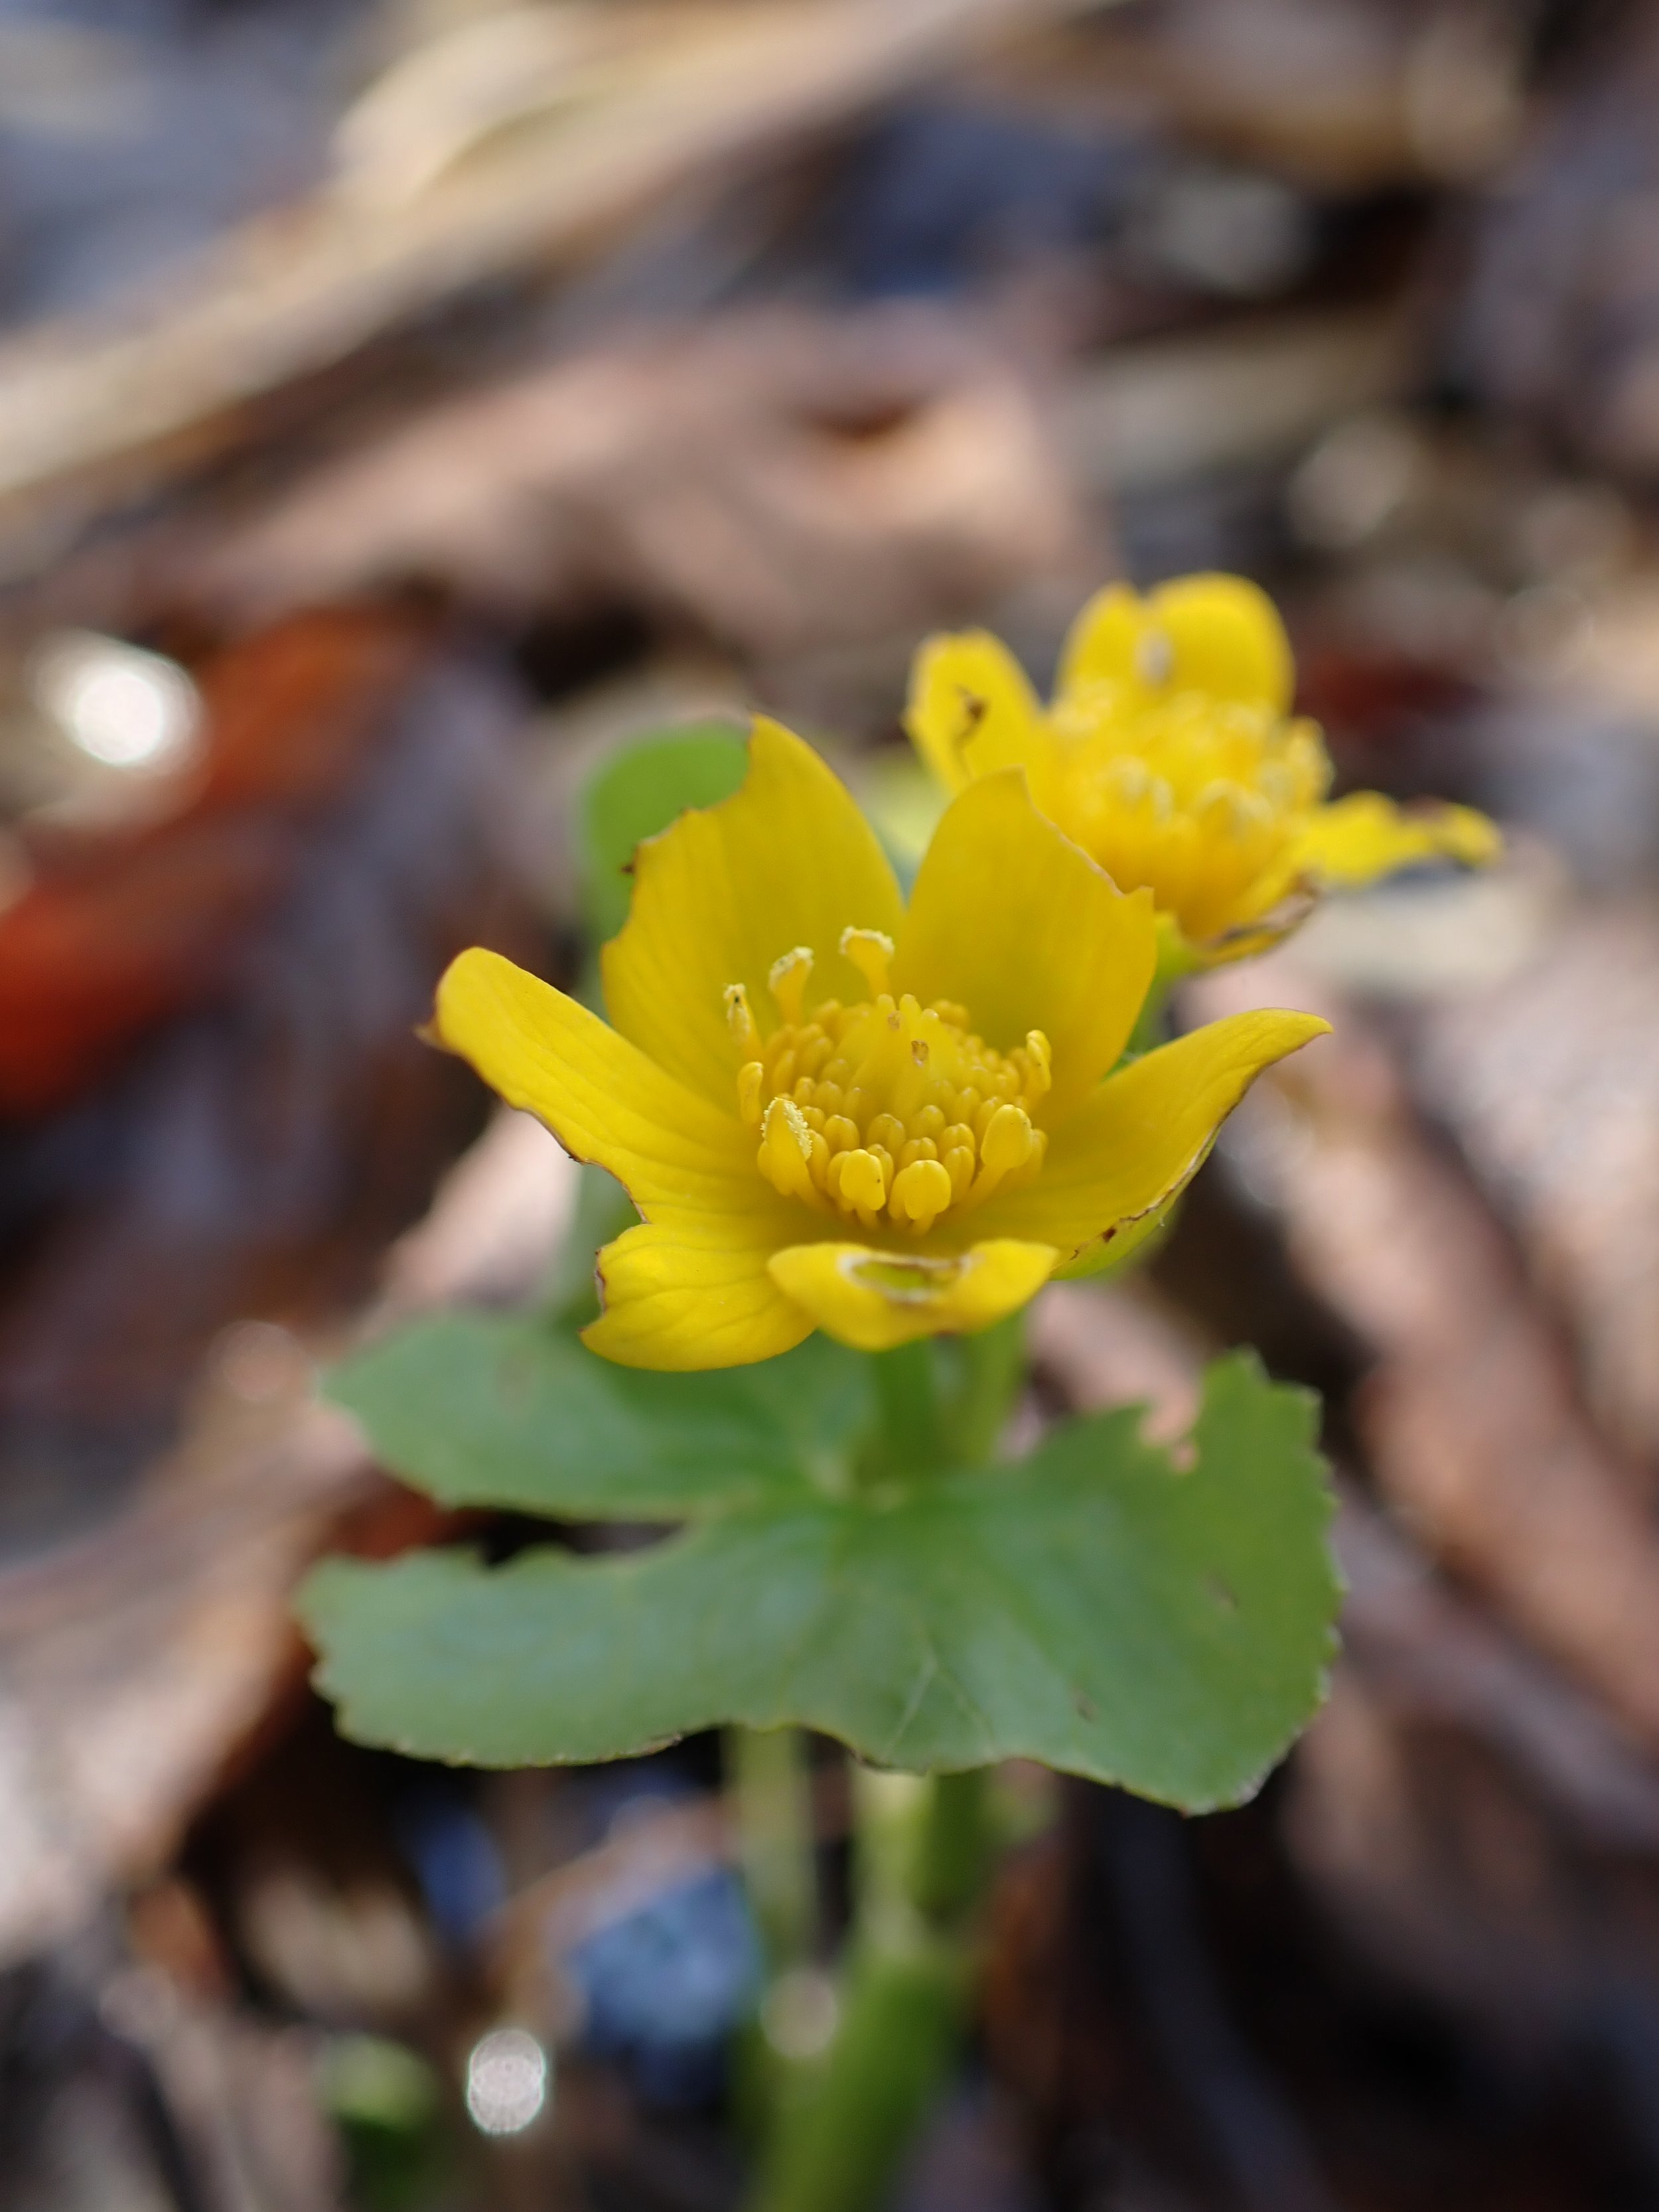  A Marsh Marigold, that typically blooms in the spring, was seen blooming on a fall visit, perhaps fooled by the fluctuating temperatures (Photo by Kasia Zgurzynski).  